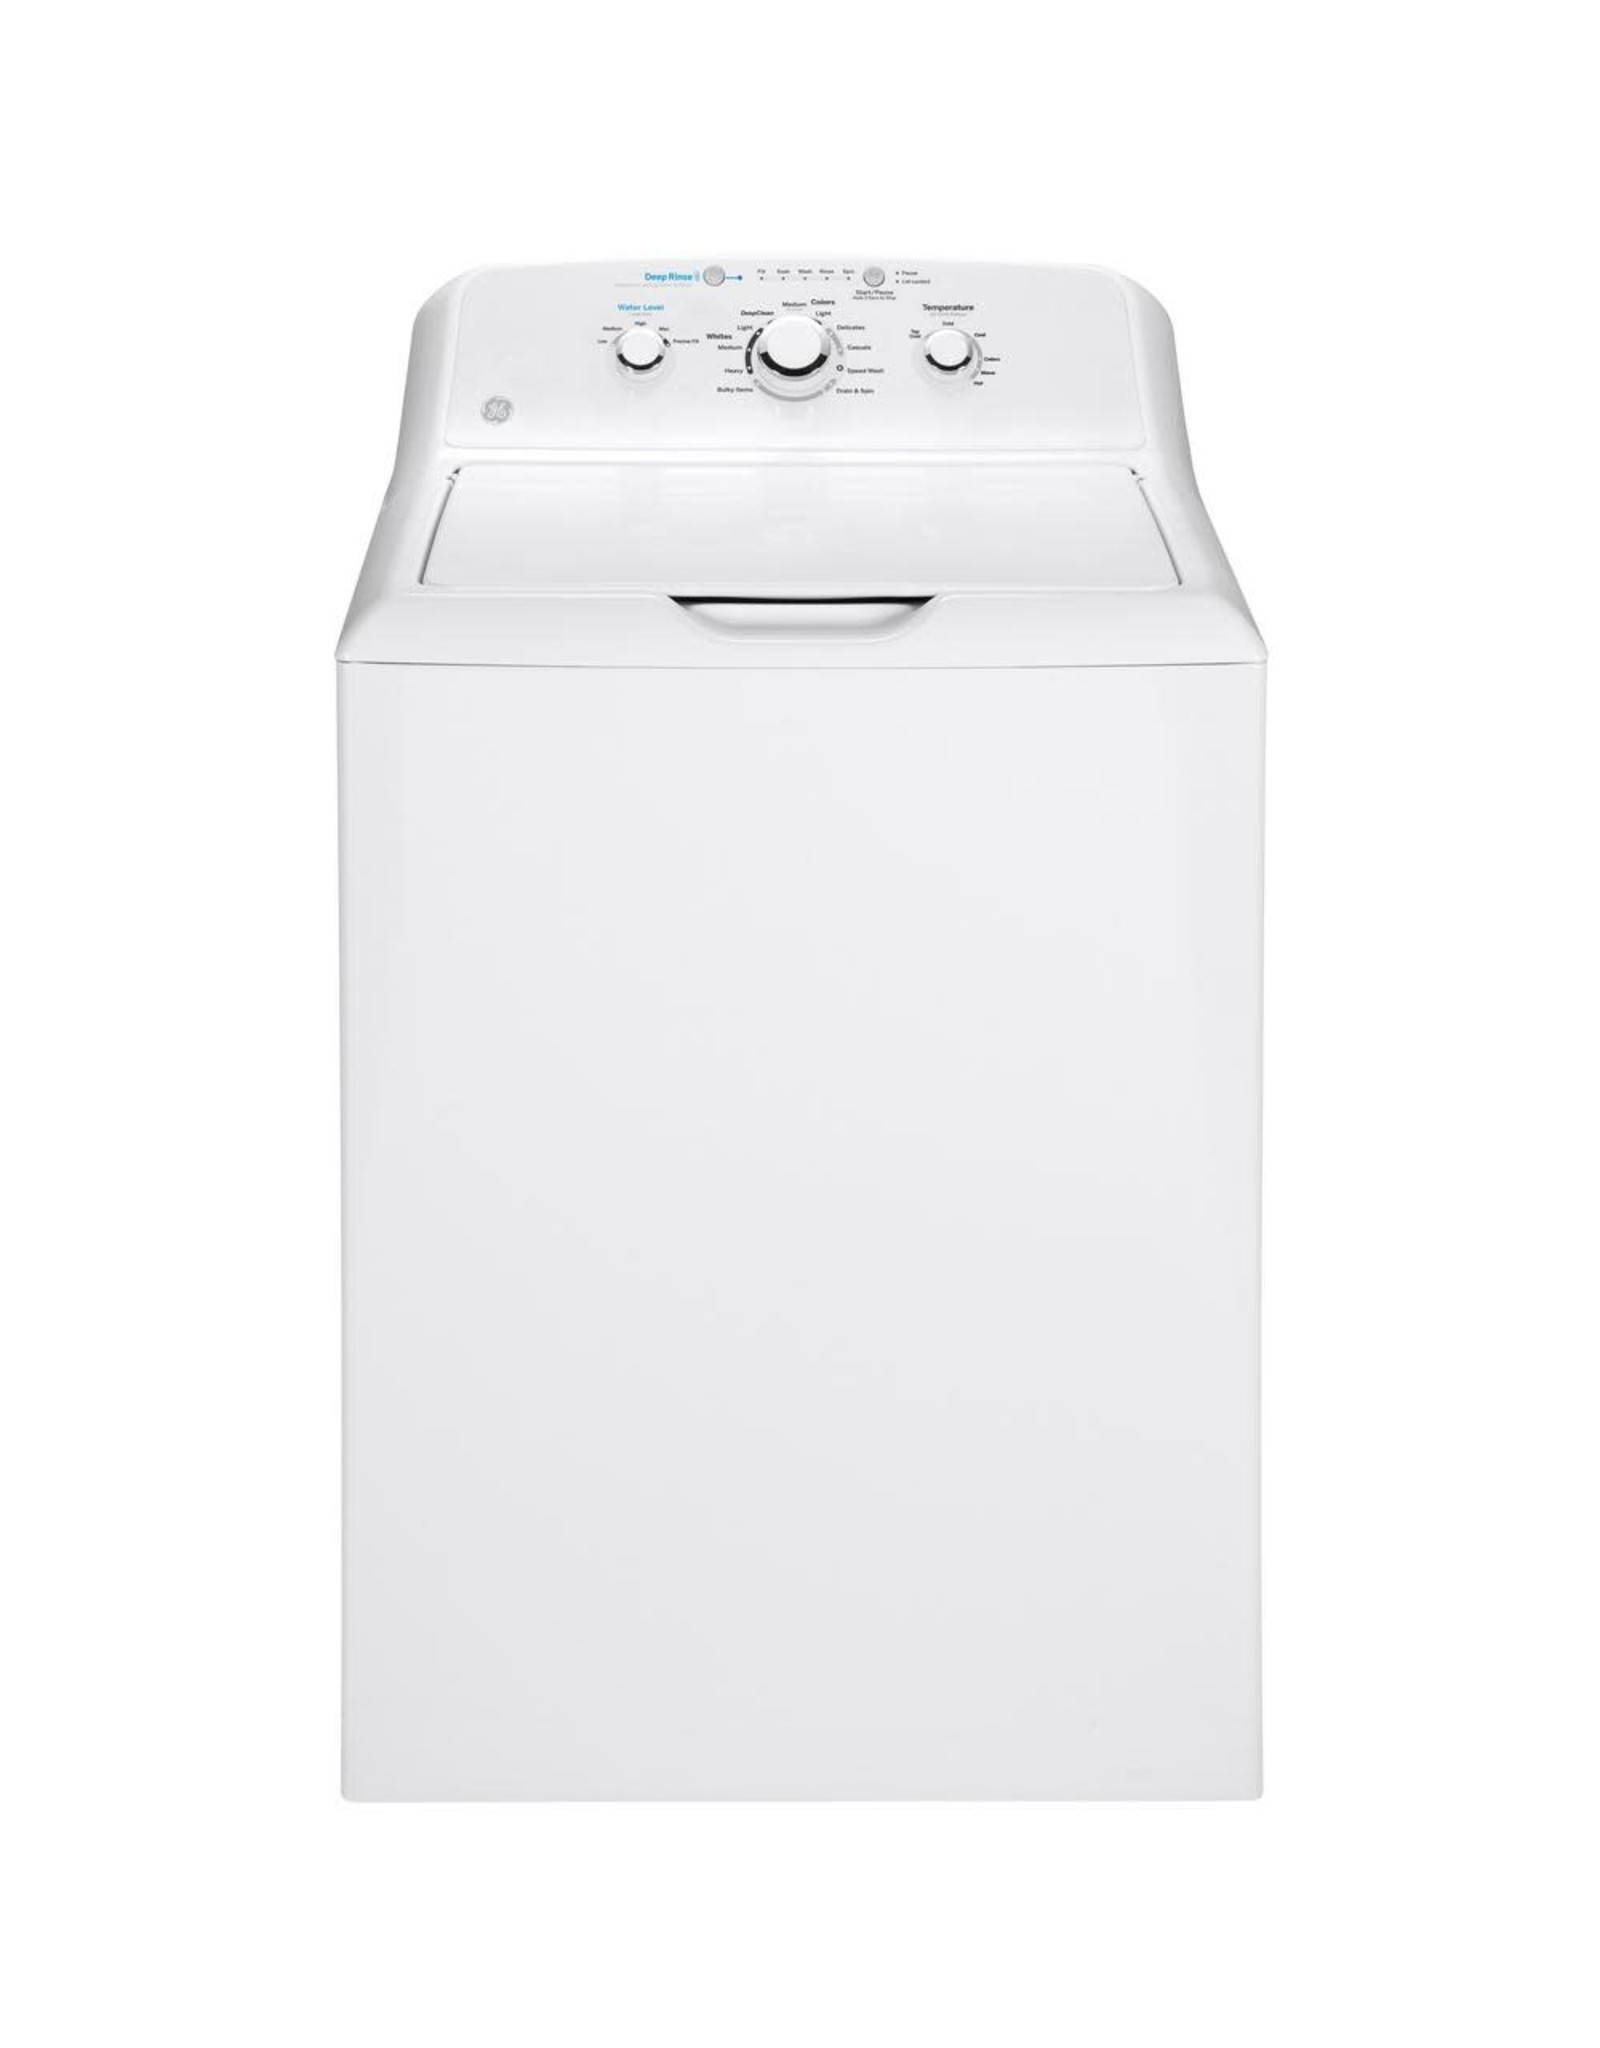 GTW335ASNWW /004232 GE 4.2 cu. ft. White Top Load Washing Machine with Stainless Steel Basket